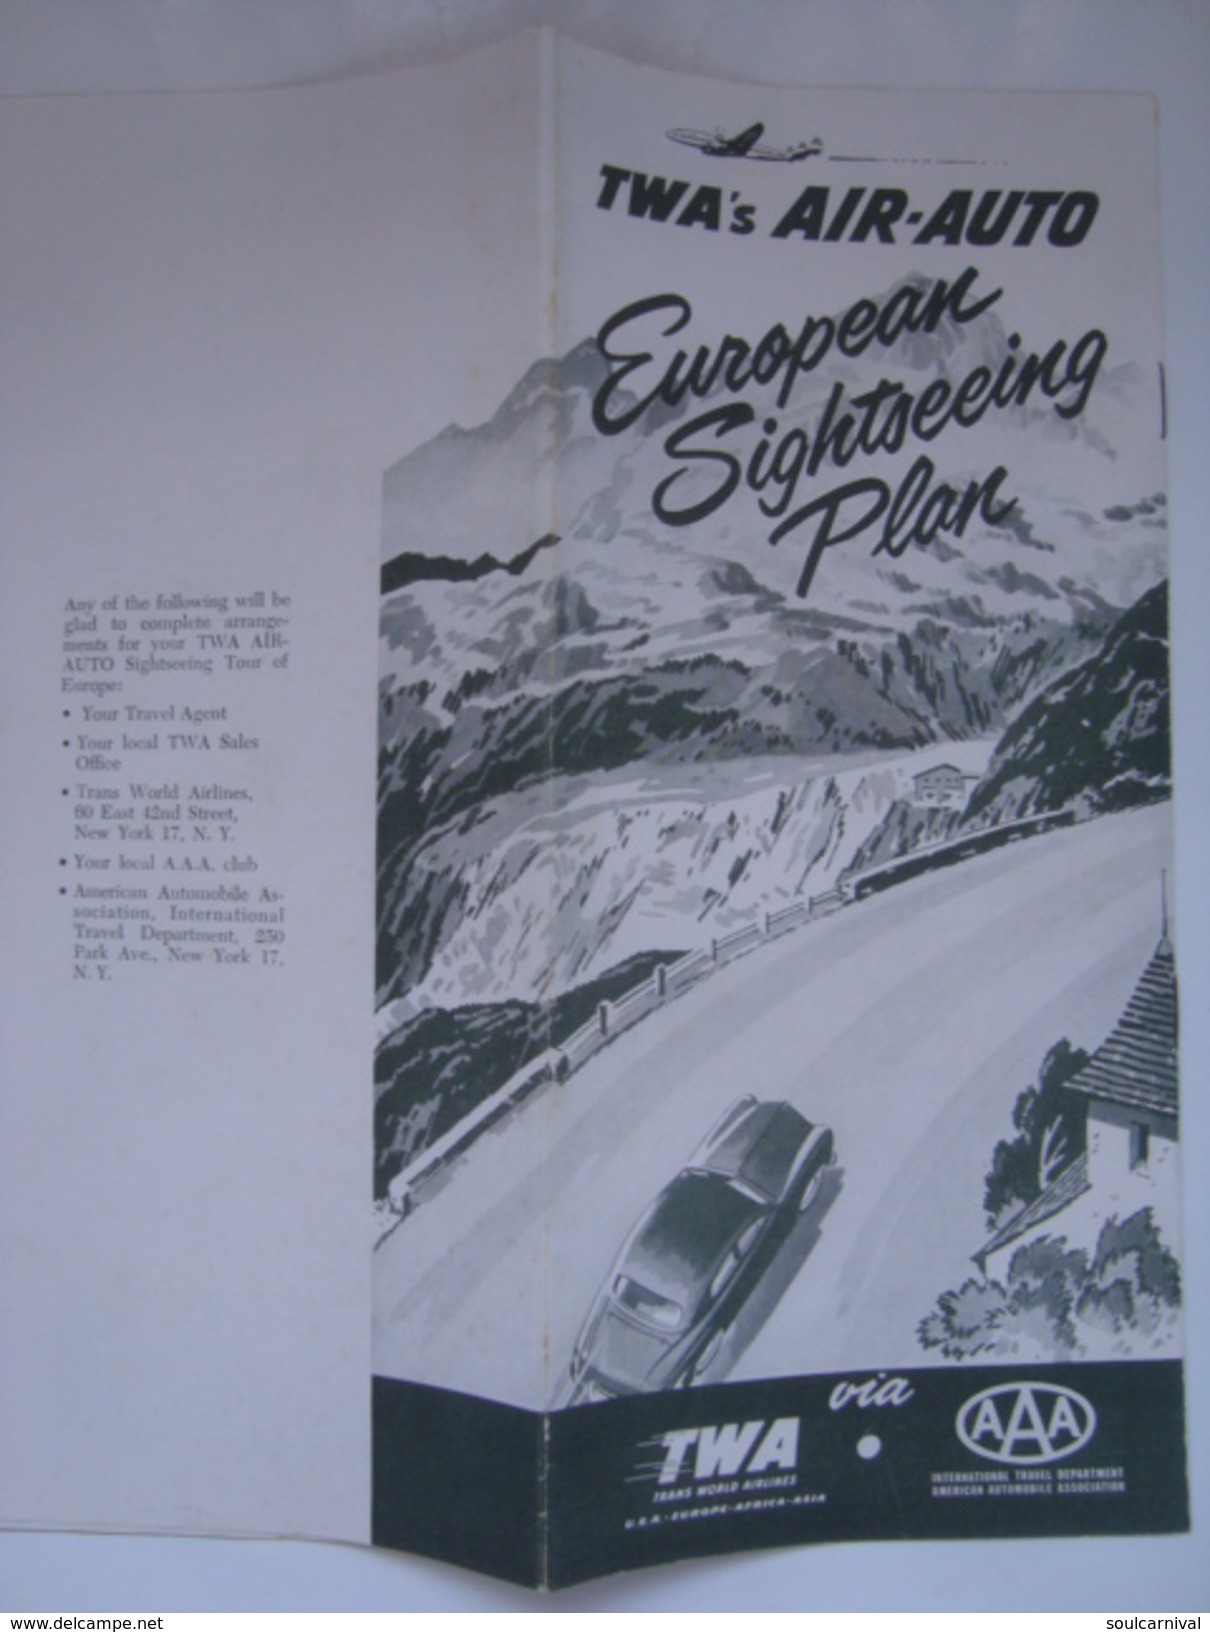 TWA'S AIR-AUTO. EUROPEAN SIGHTSEEING PLAN. TWA VIA AAA - 1952 APROX. 8 PAGES. AMERICAN AUTOMOBILE ASSOCIATION. - Publicités